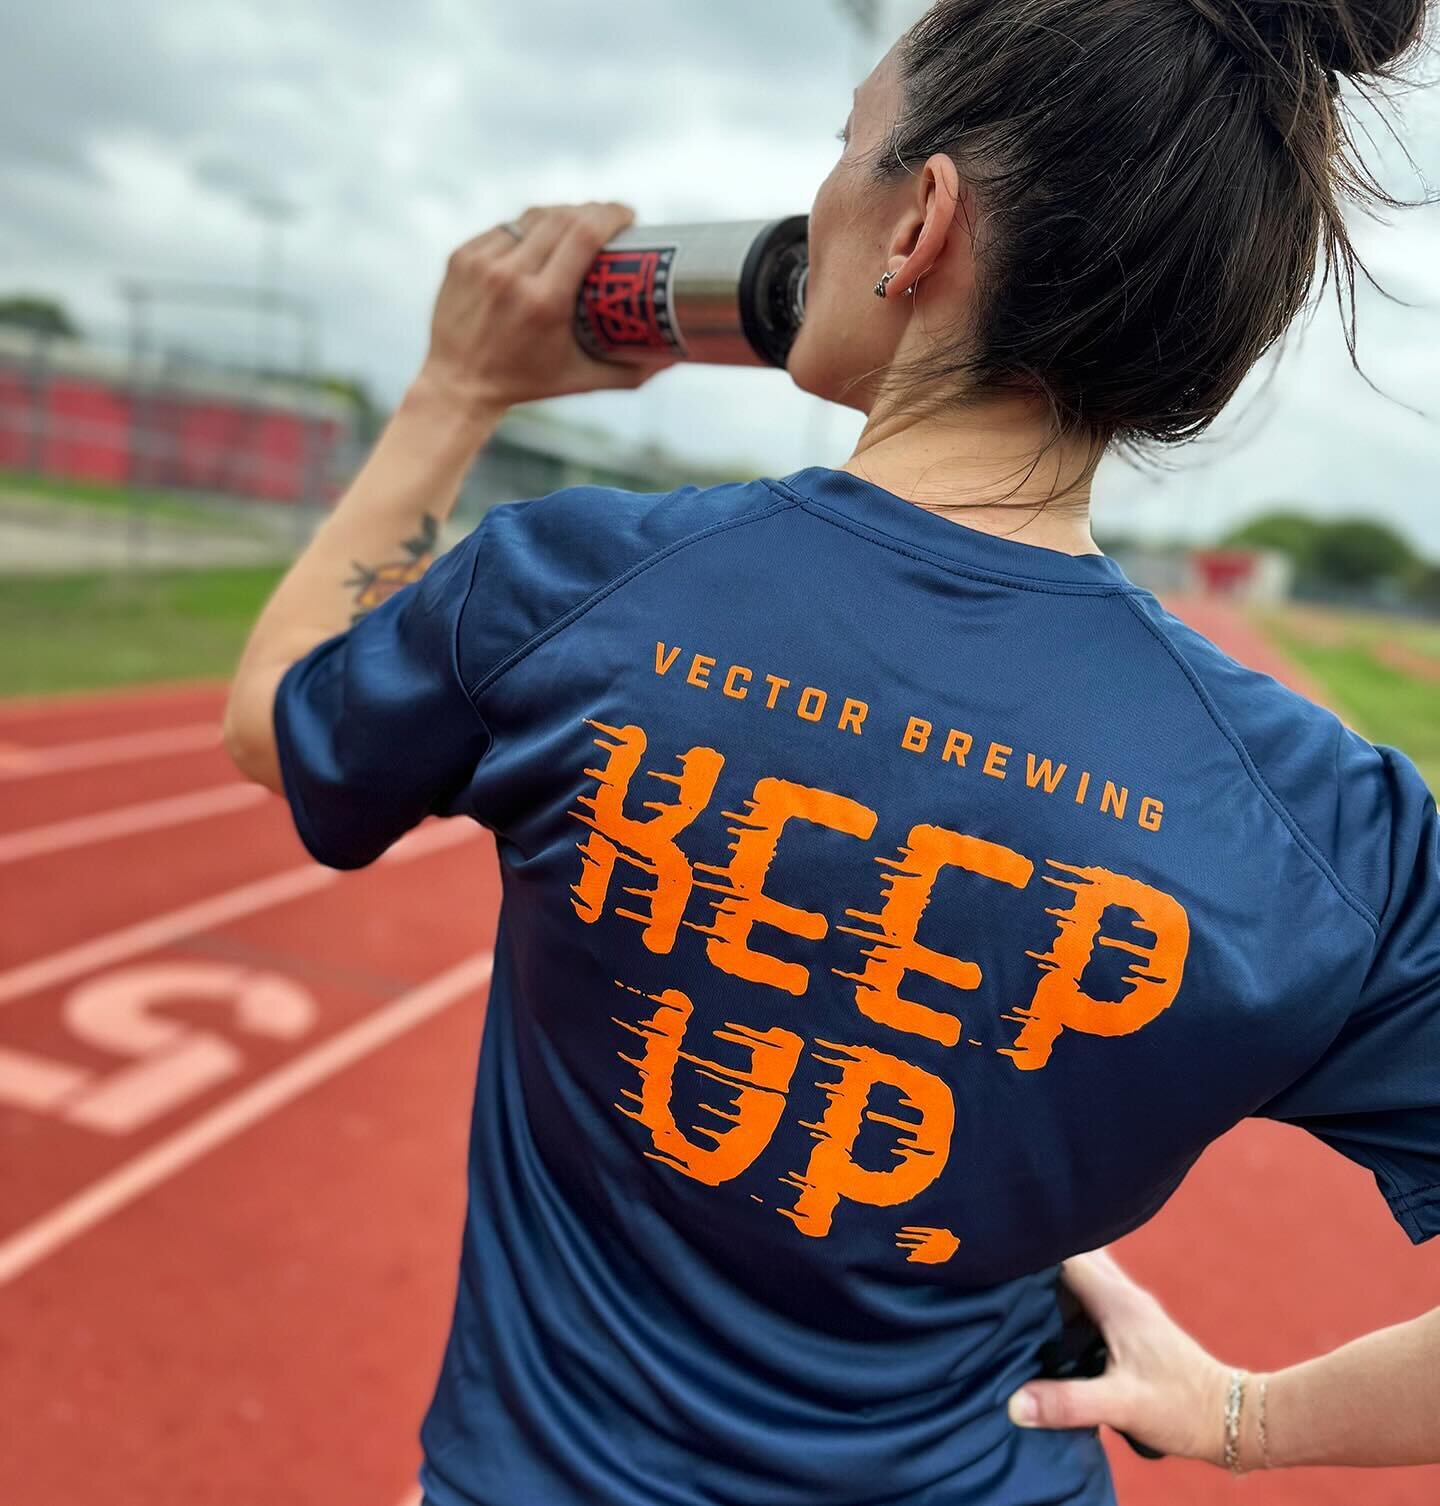 NEW DRI-FIT WORKOUT SHIRTS HAVE ARRIVED!💪

🏃🏽&zwj;♀️🏃🏽🏃🏻&zwj;♂️🚴🚴&zwj;♀️🚴&zwj;♂️🏌🏻&zwj;♂️🏋🏻&zwj;♀️

Whether you&rsquo;re zipping through the trails and back streets to get to the closest brewery or pushing a stroller down the street (to